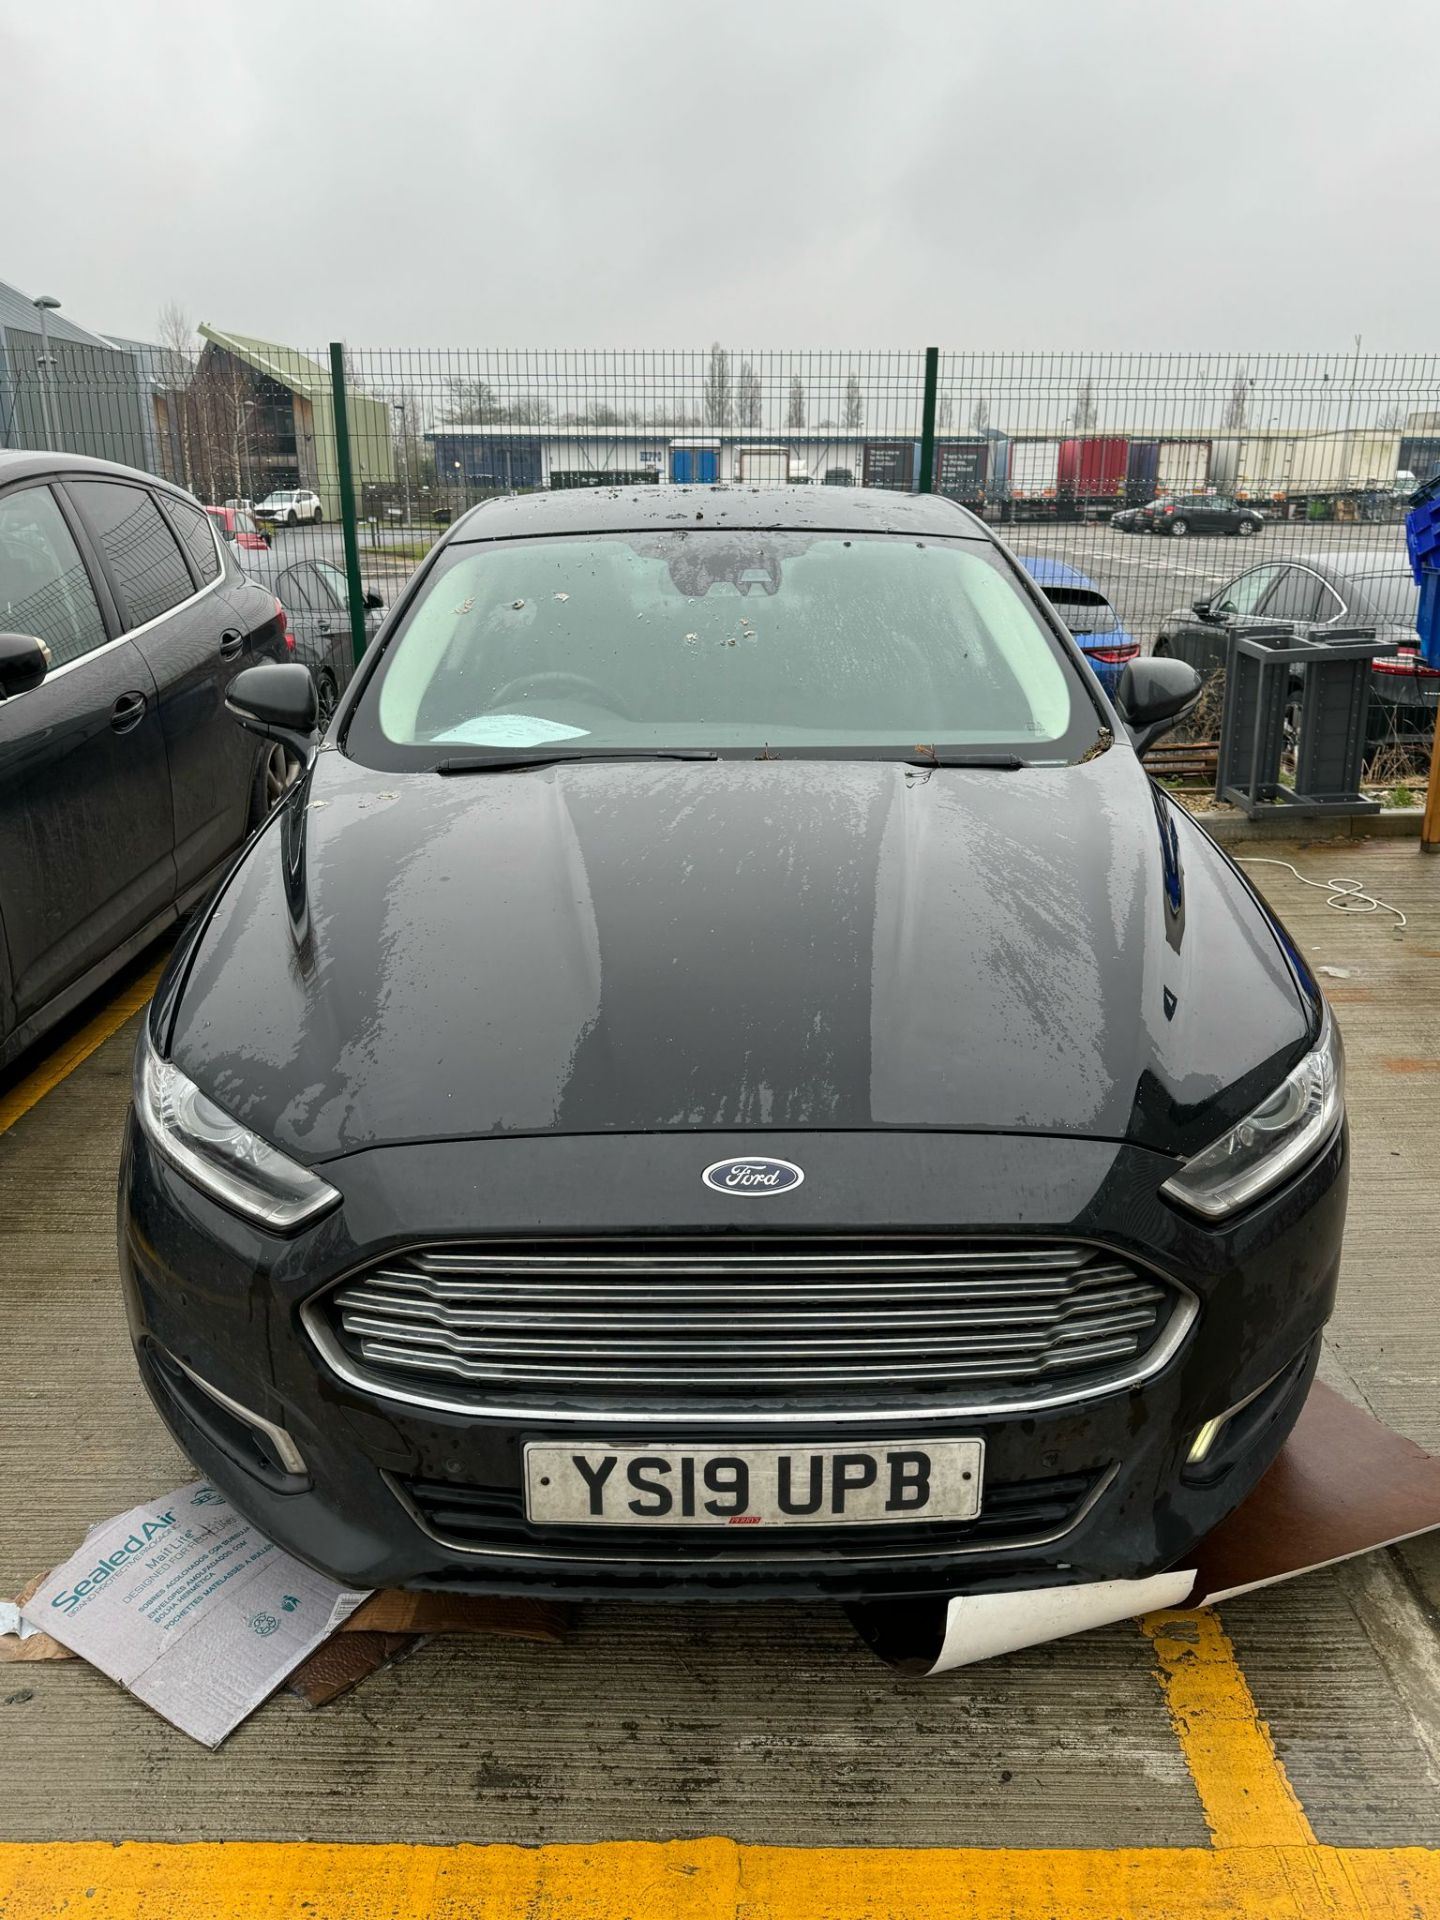 NO RESERVE - 2019, FORD Mondeo (Ex-Fleet Vehicle) - Image 5 of 19